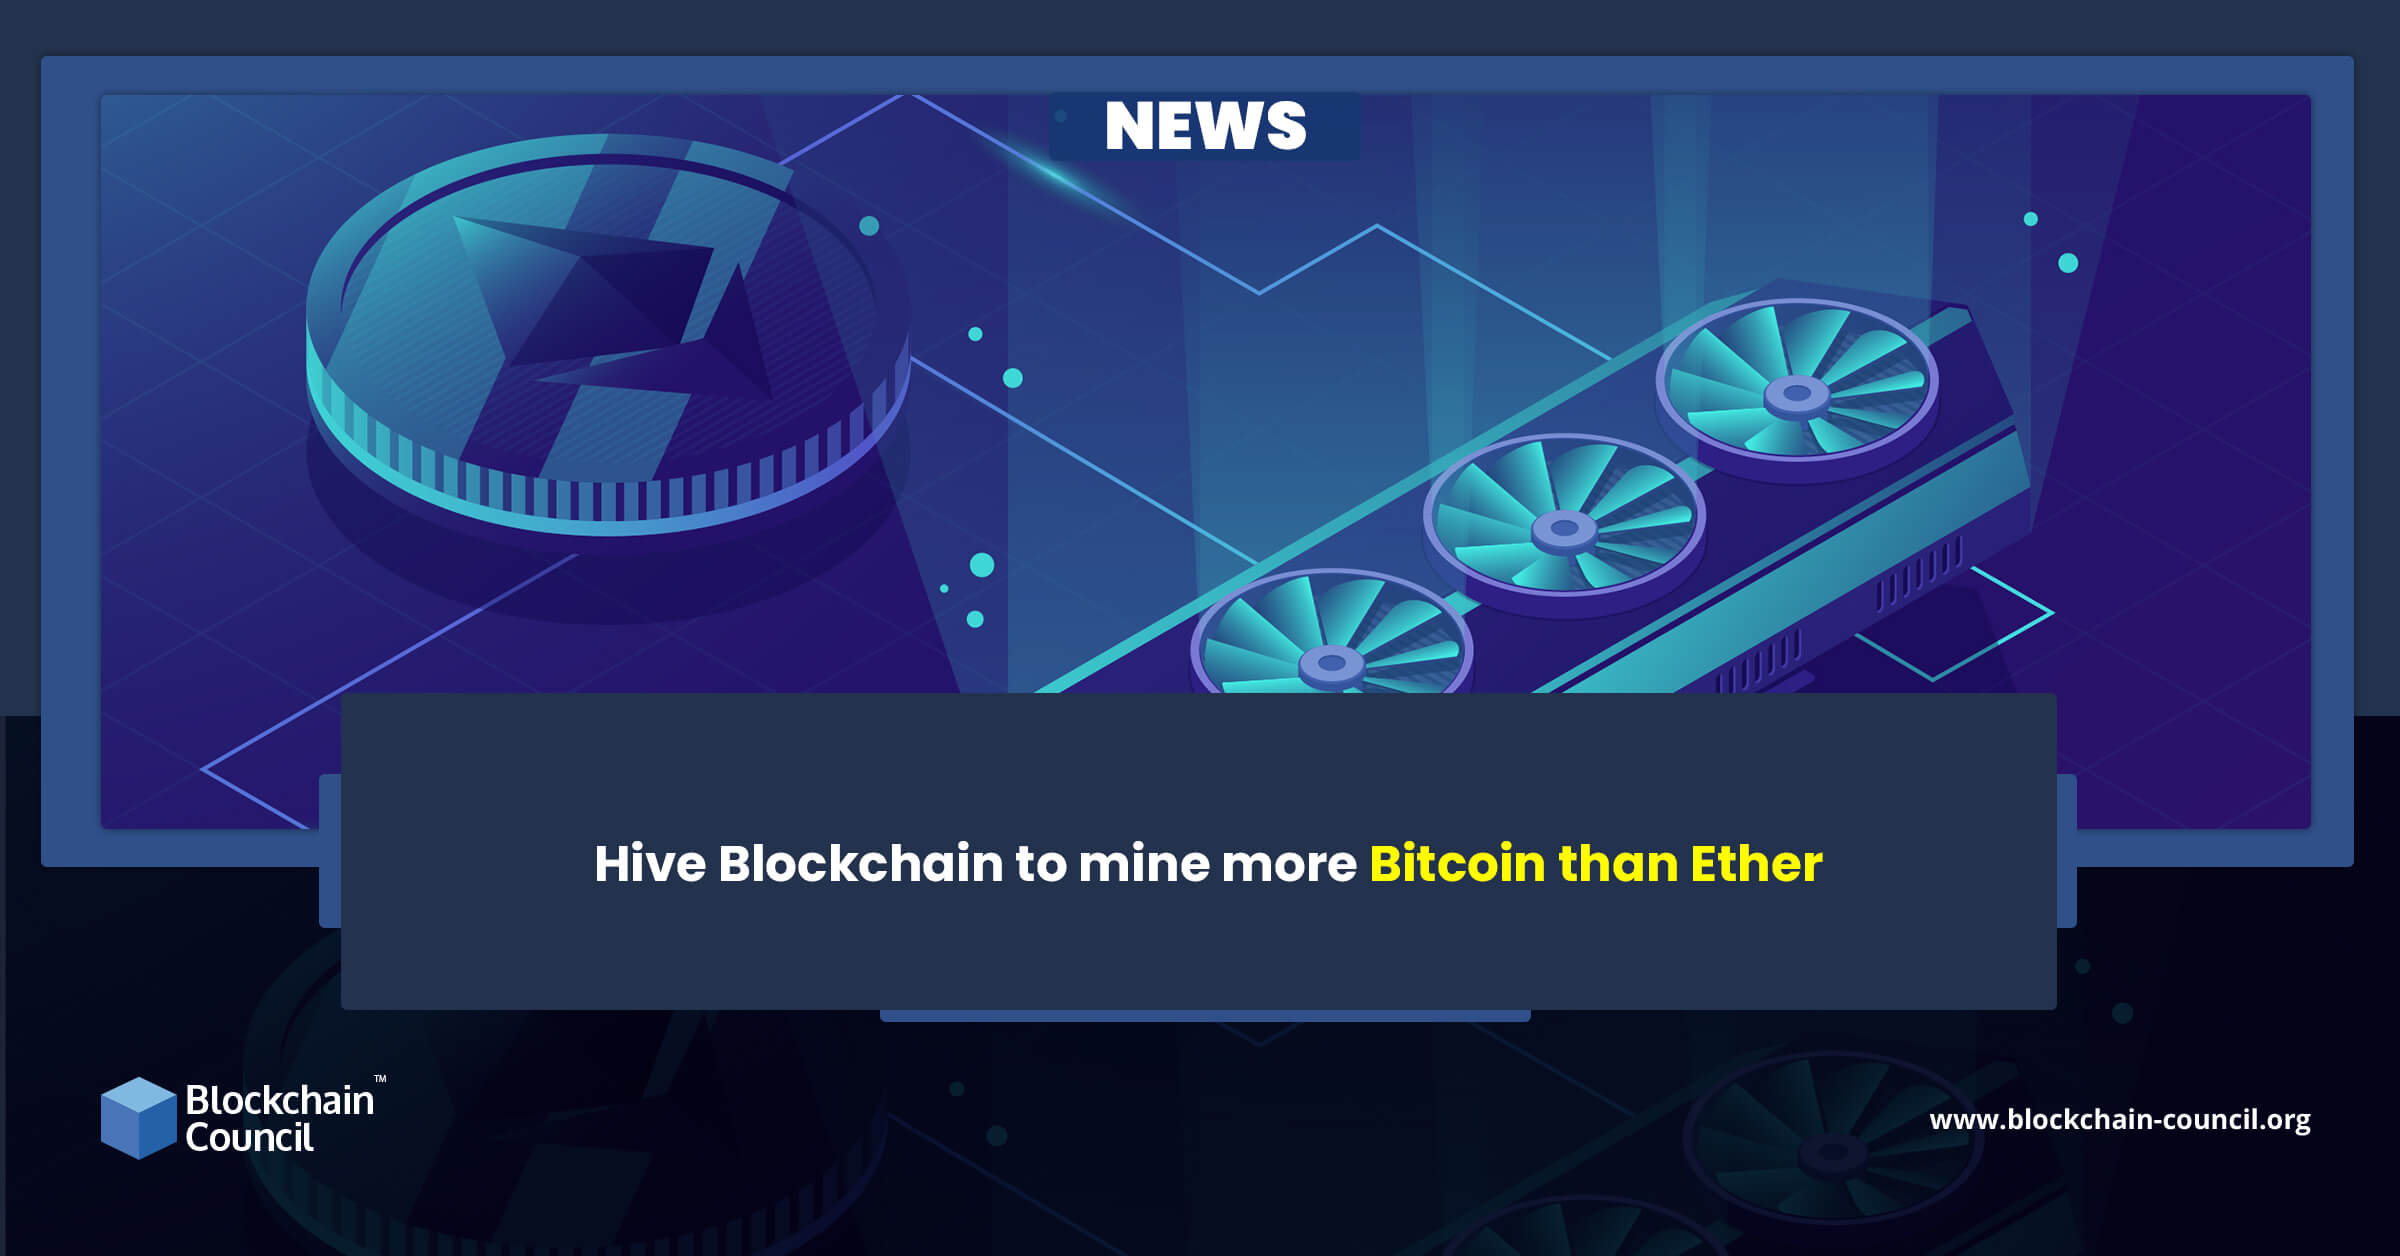 Hive Blockchain to mine more Bitcoin than Ether